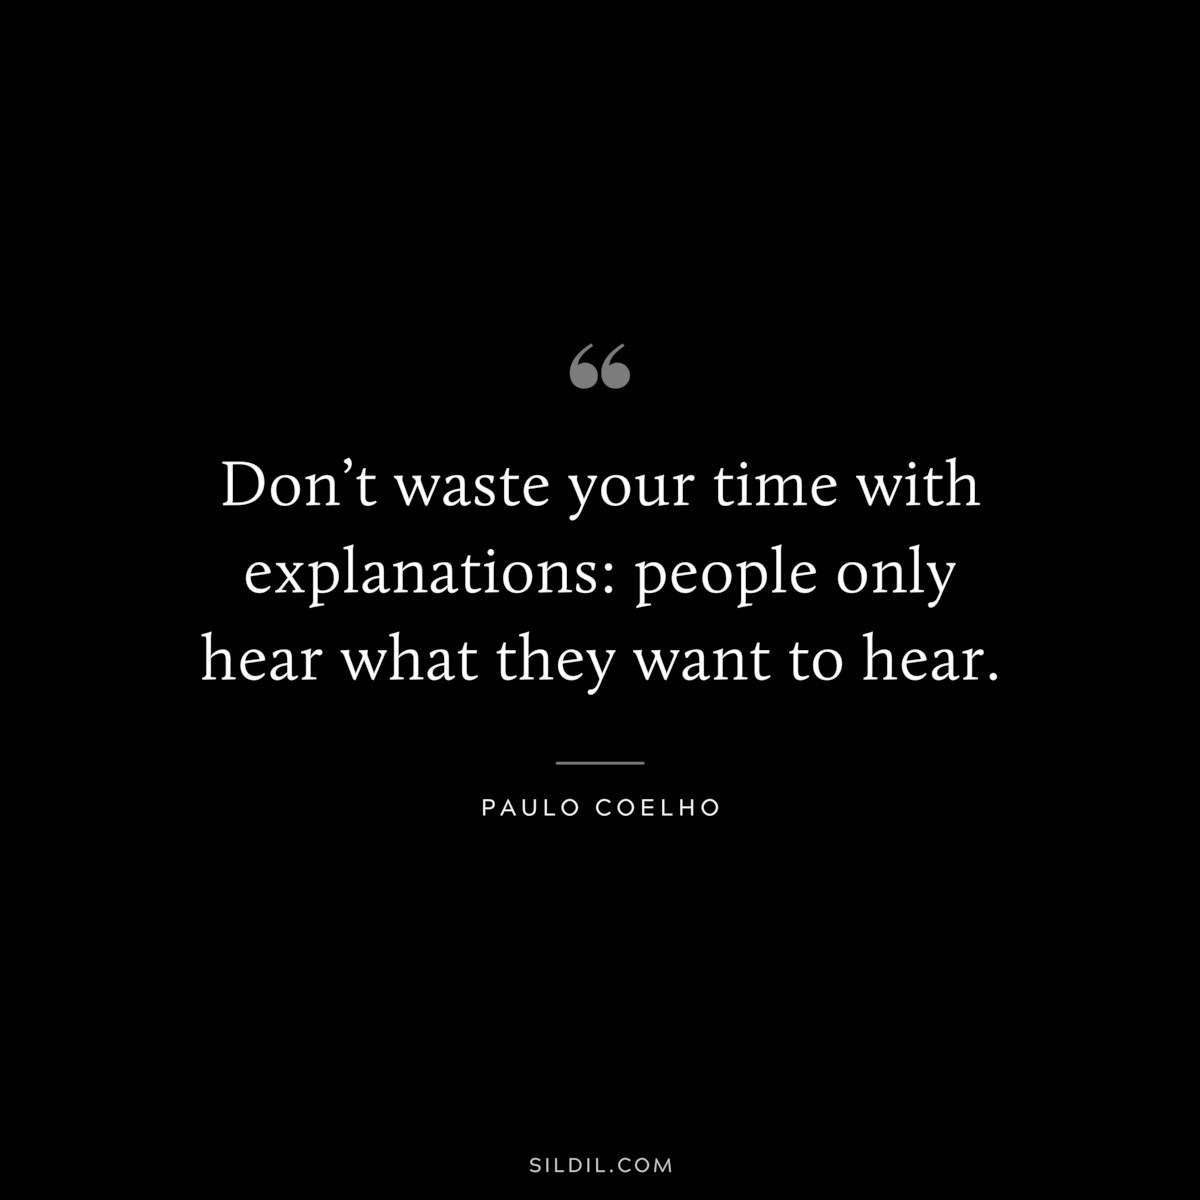 Don’t waste your time with explanations: people only hear what they want to hear. ― Paulo Coelho